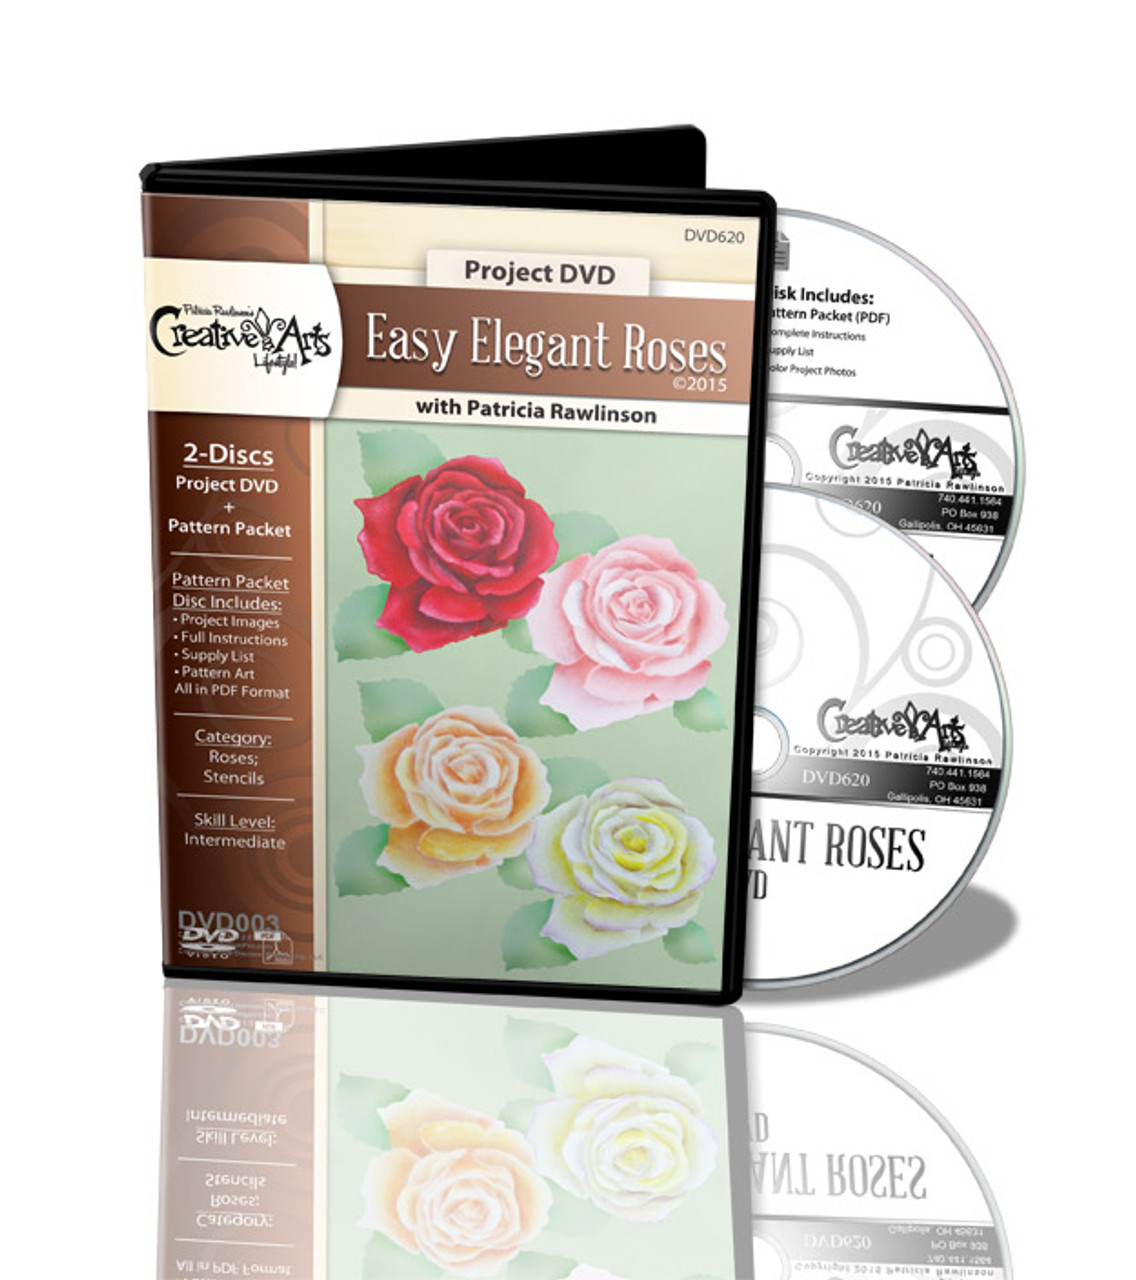 Easy Elegant Stenciled Roses DVD and Pattern Packet - Patricia Rawlinson